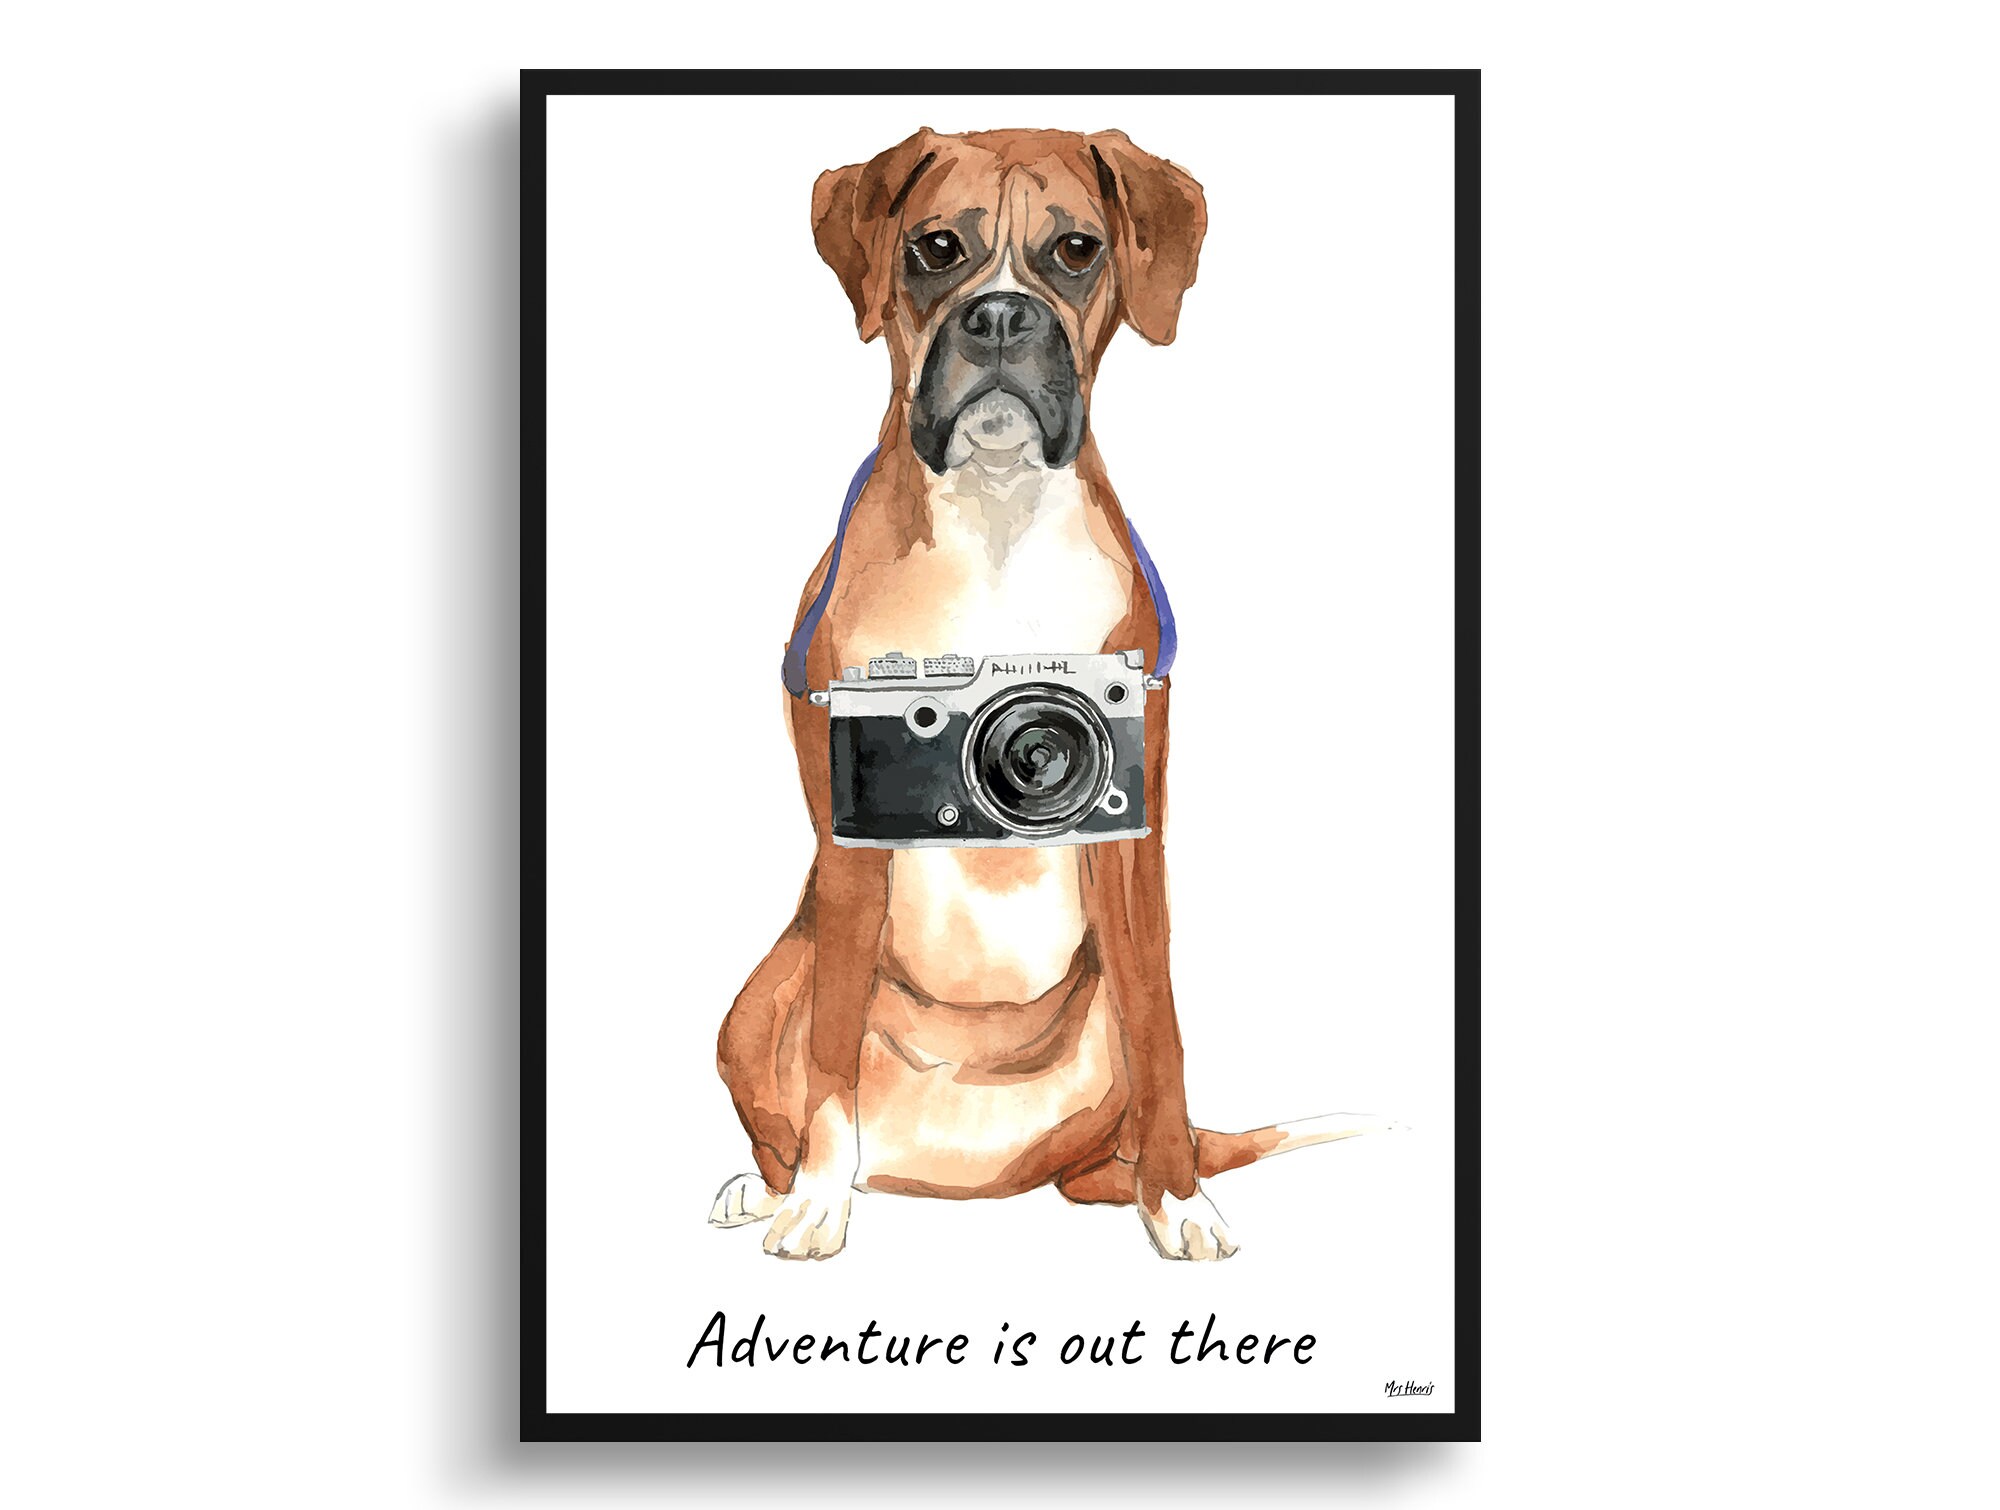 Adventure Is Out There Boxer Dog Print Illustration. Framed & Un-Framed Wall Art Options. Personalised Name. Poster Sizes